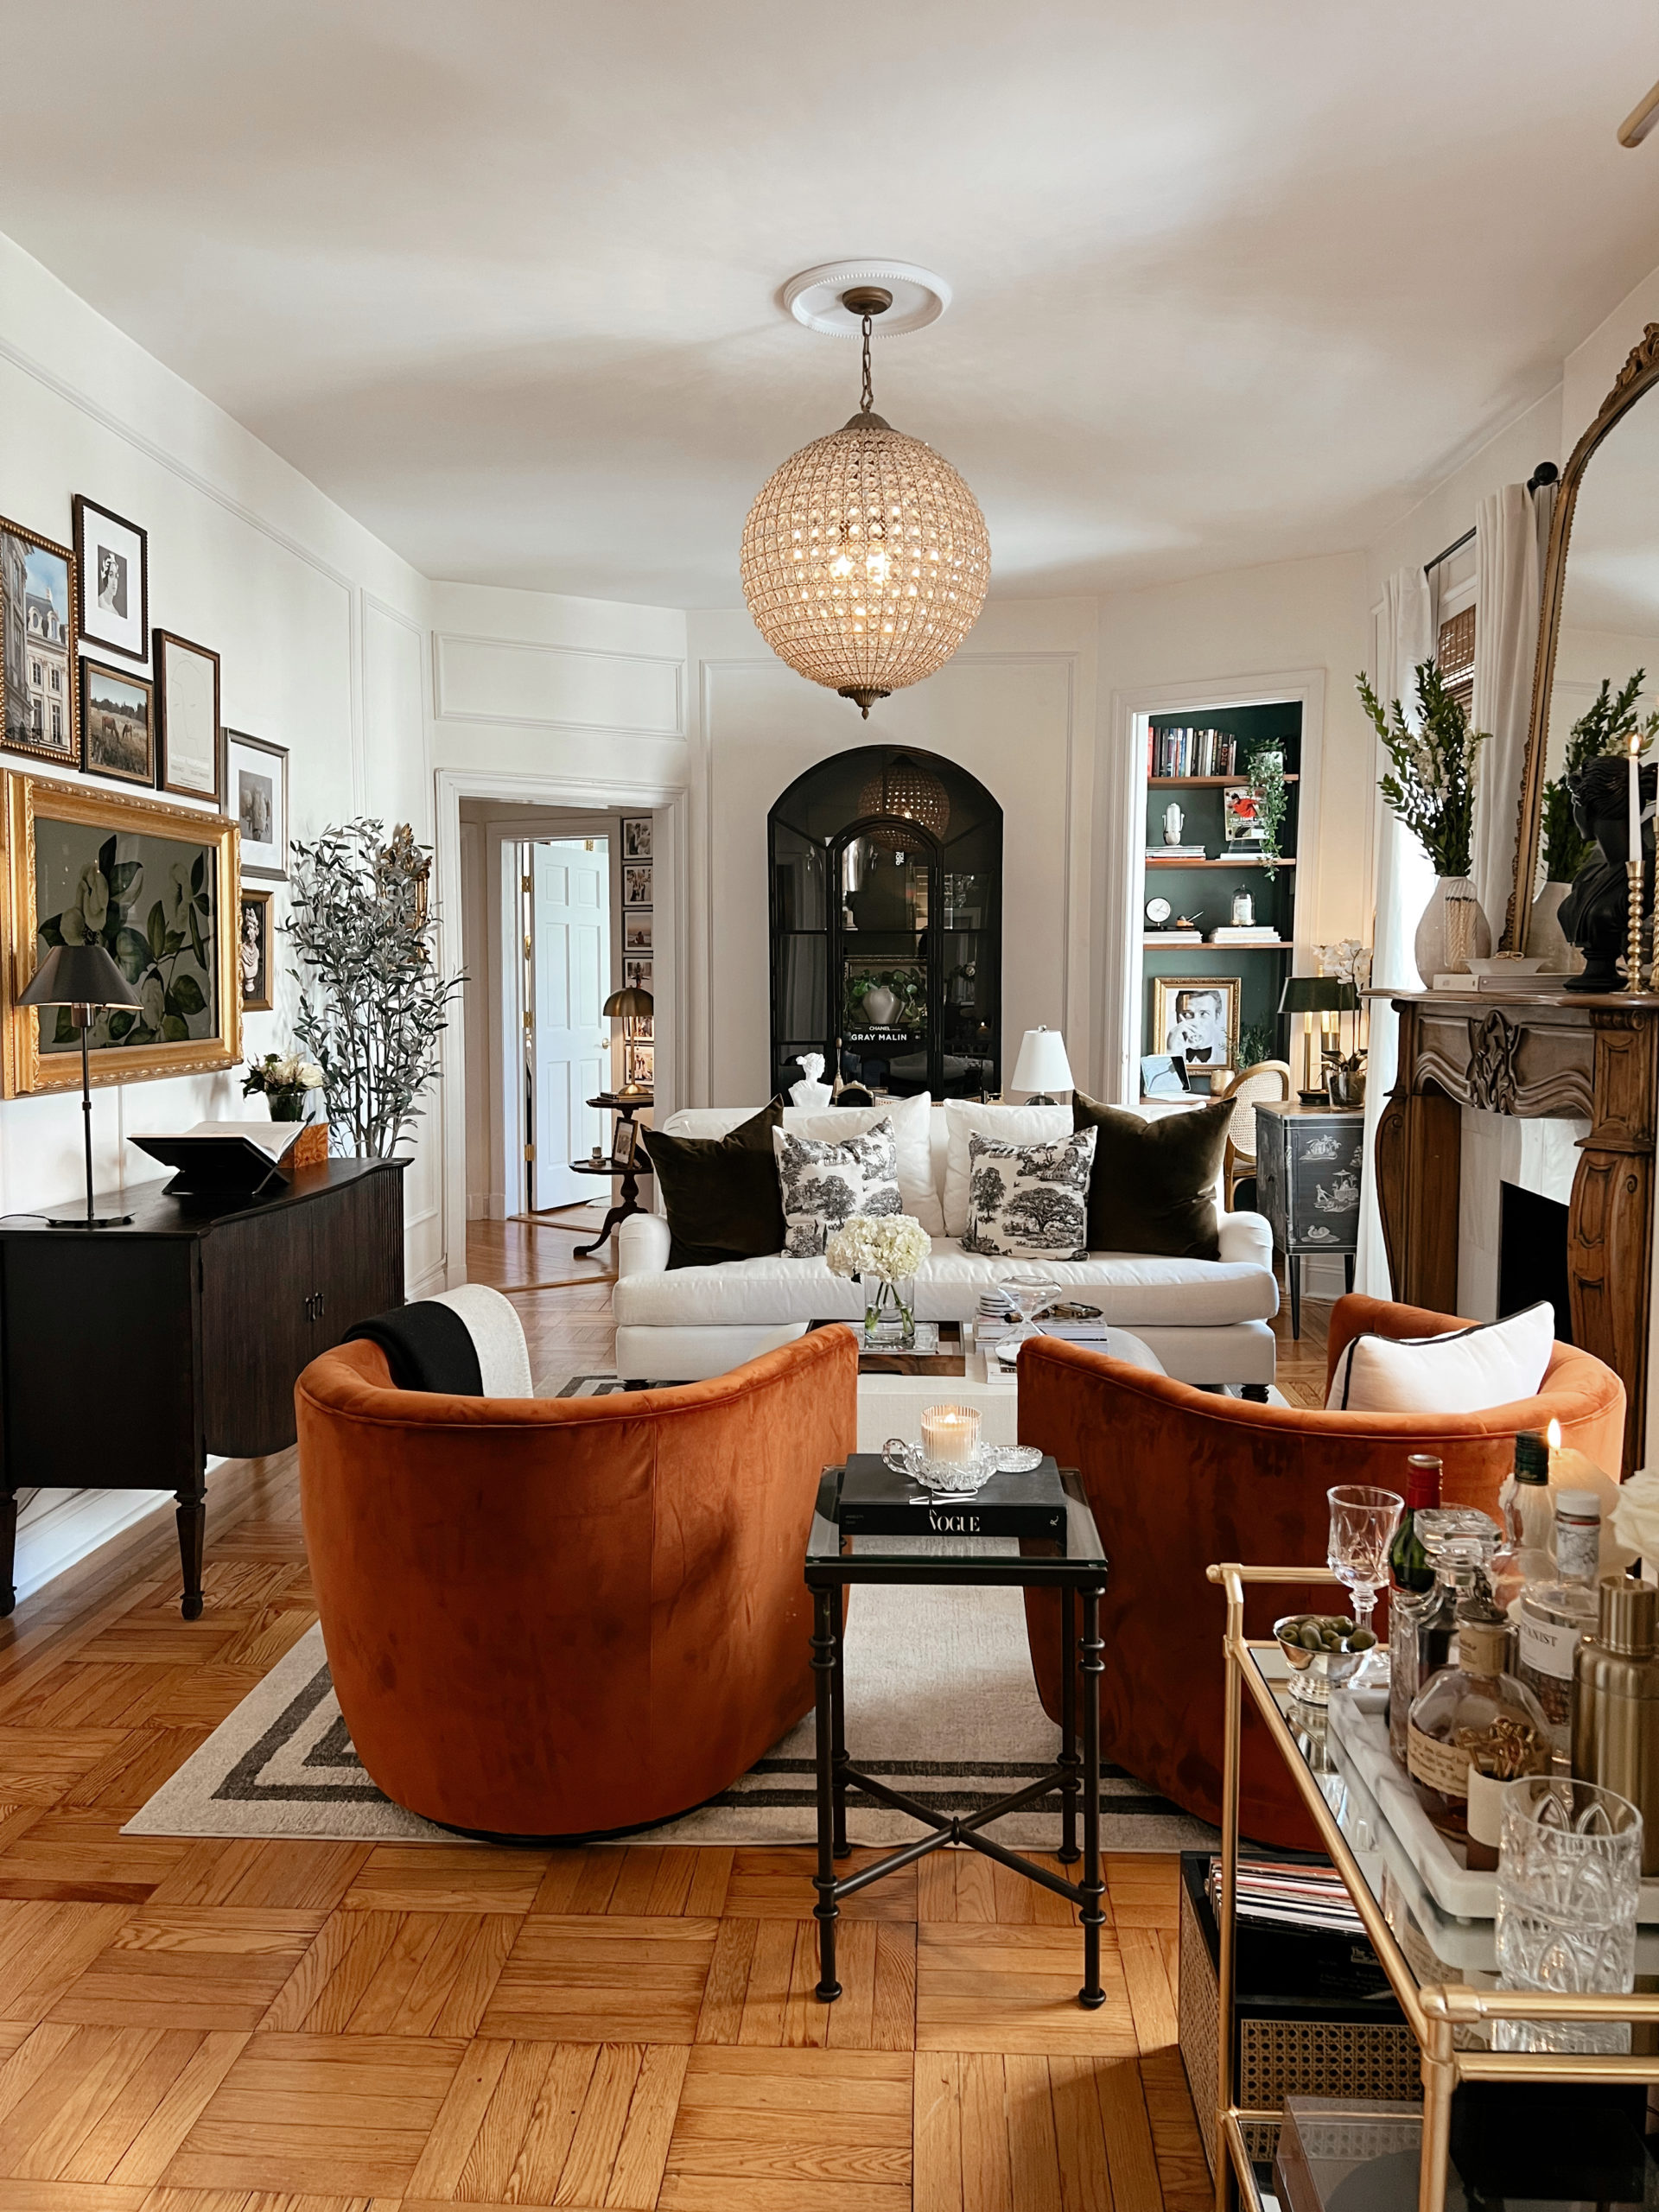 Anna's Upper East Side living room with two big orange chairs, a white couch, and a beautiful chandelier.